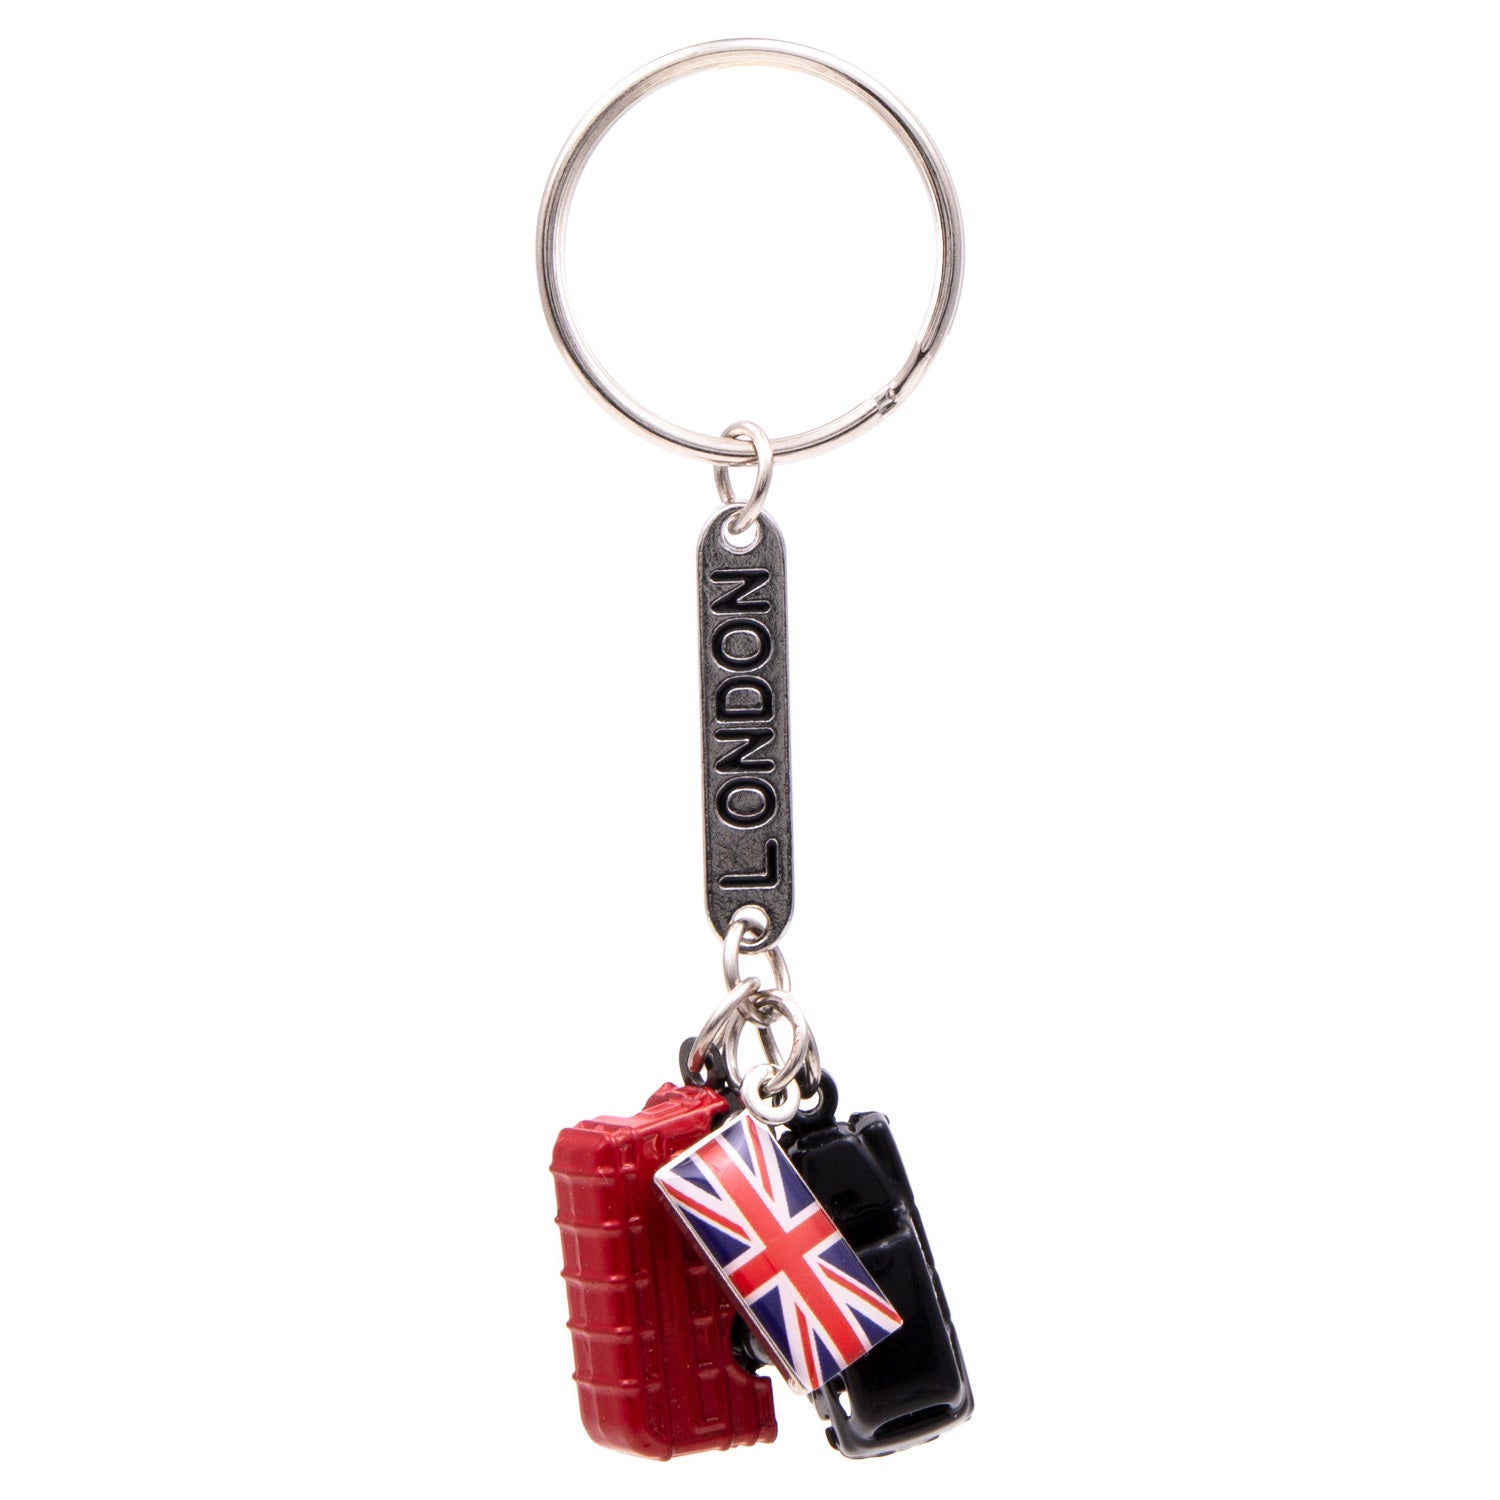 London Bus, Black Taxi and Union Jack Die Cast Keyring